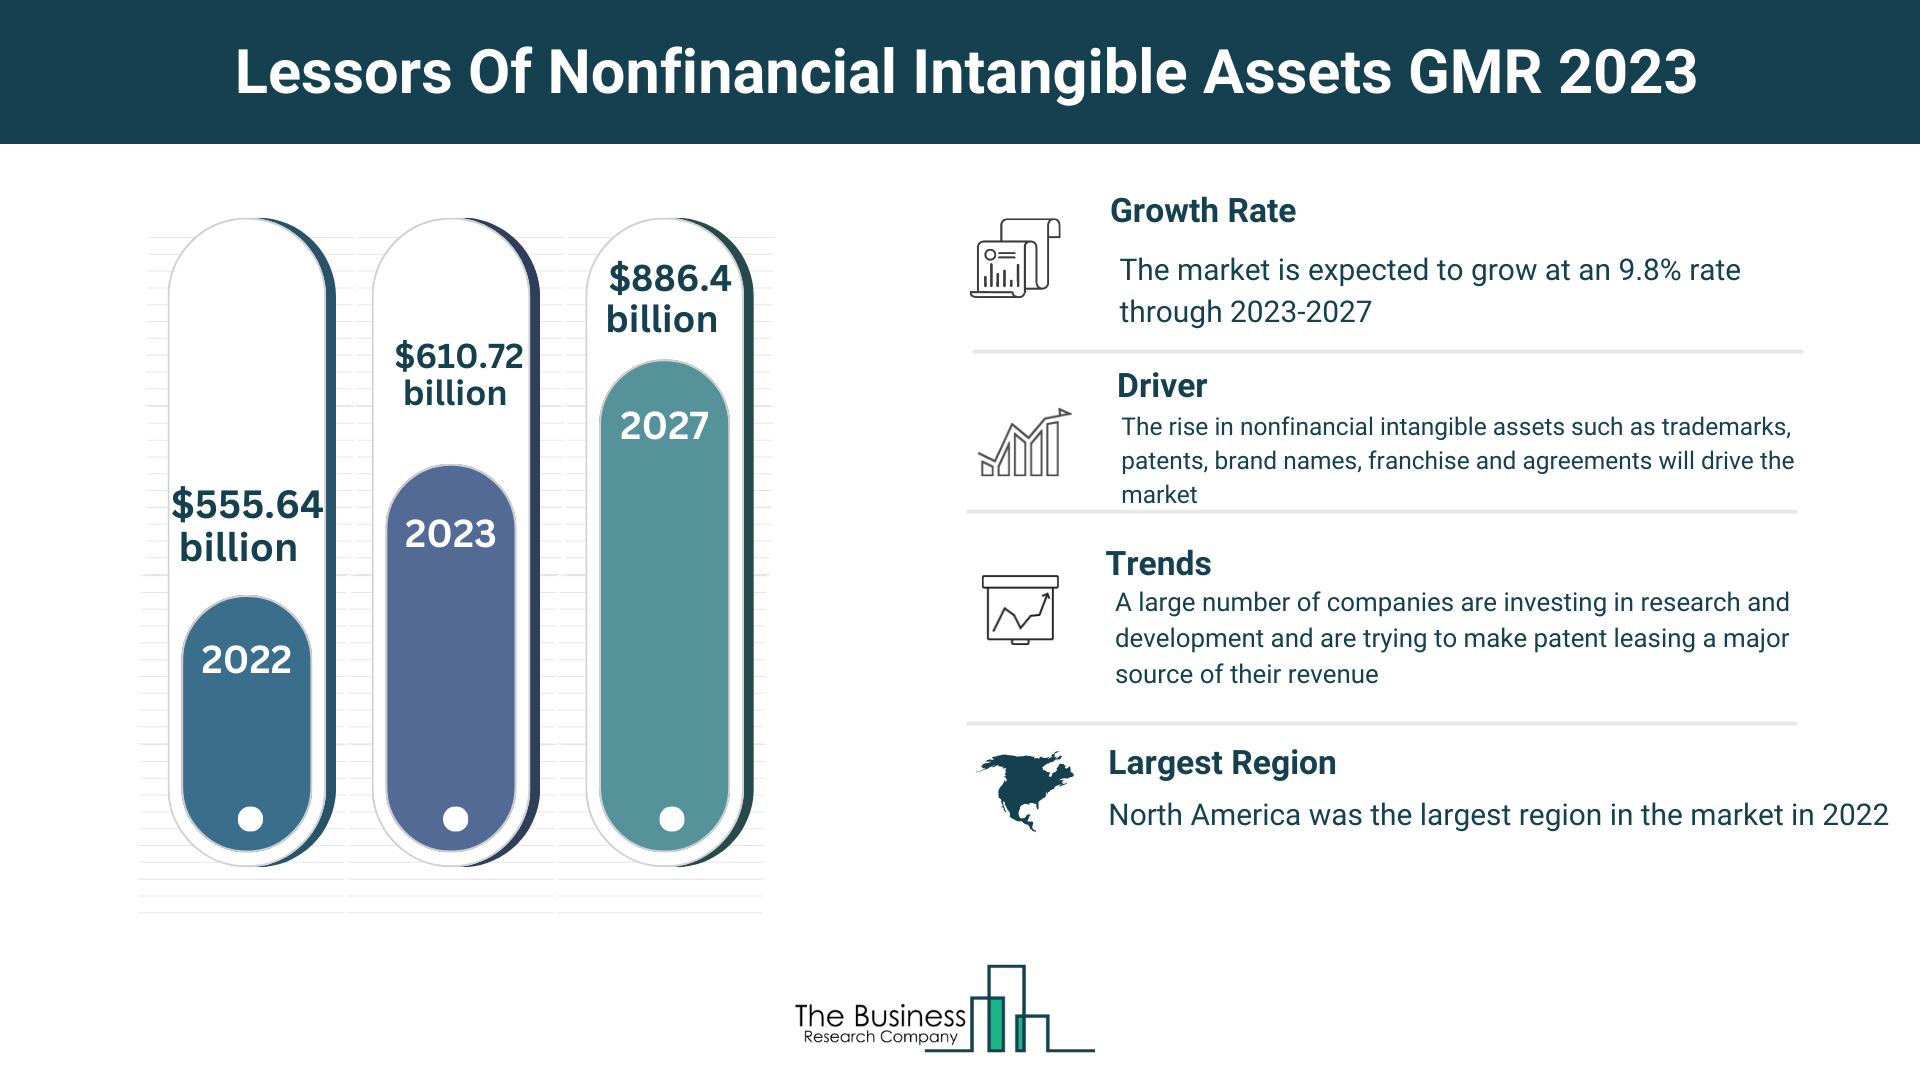 Comprehensive Lessors Of Nonfinancial Intangible Assets Market Analysis 2023: Size, Share, And Key Trends